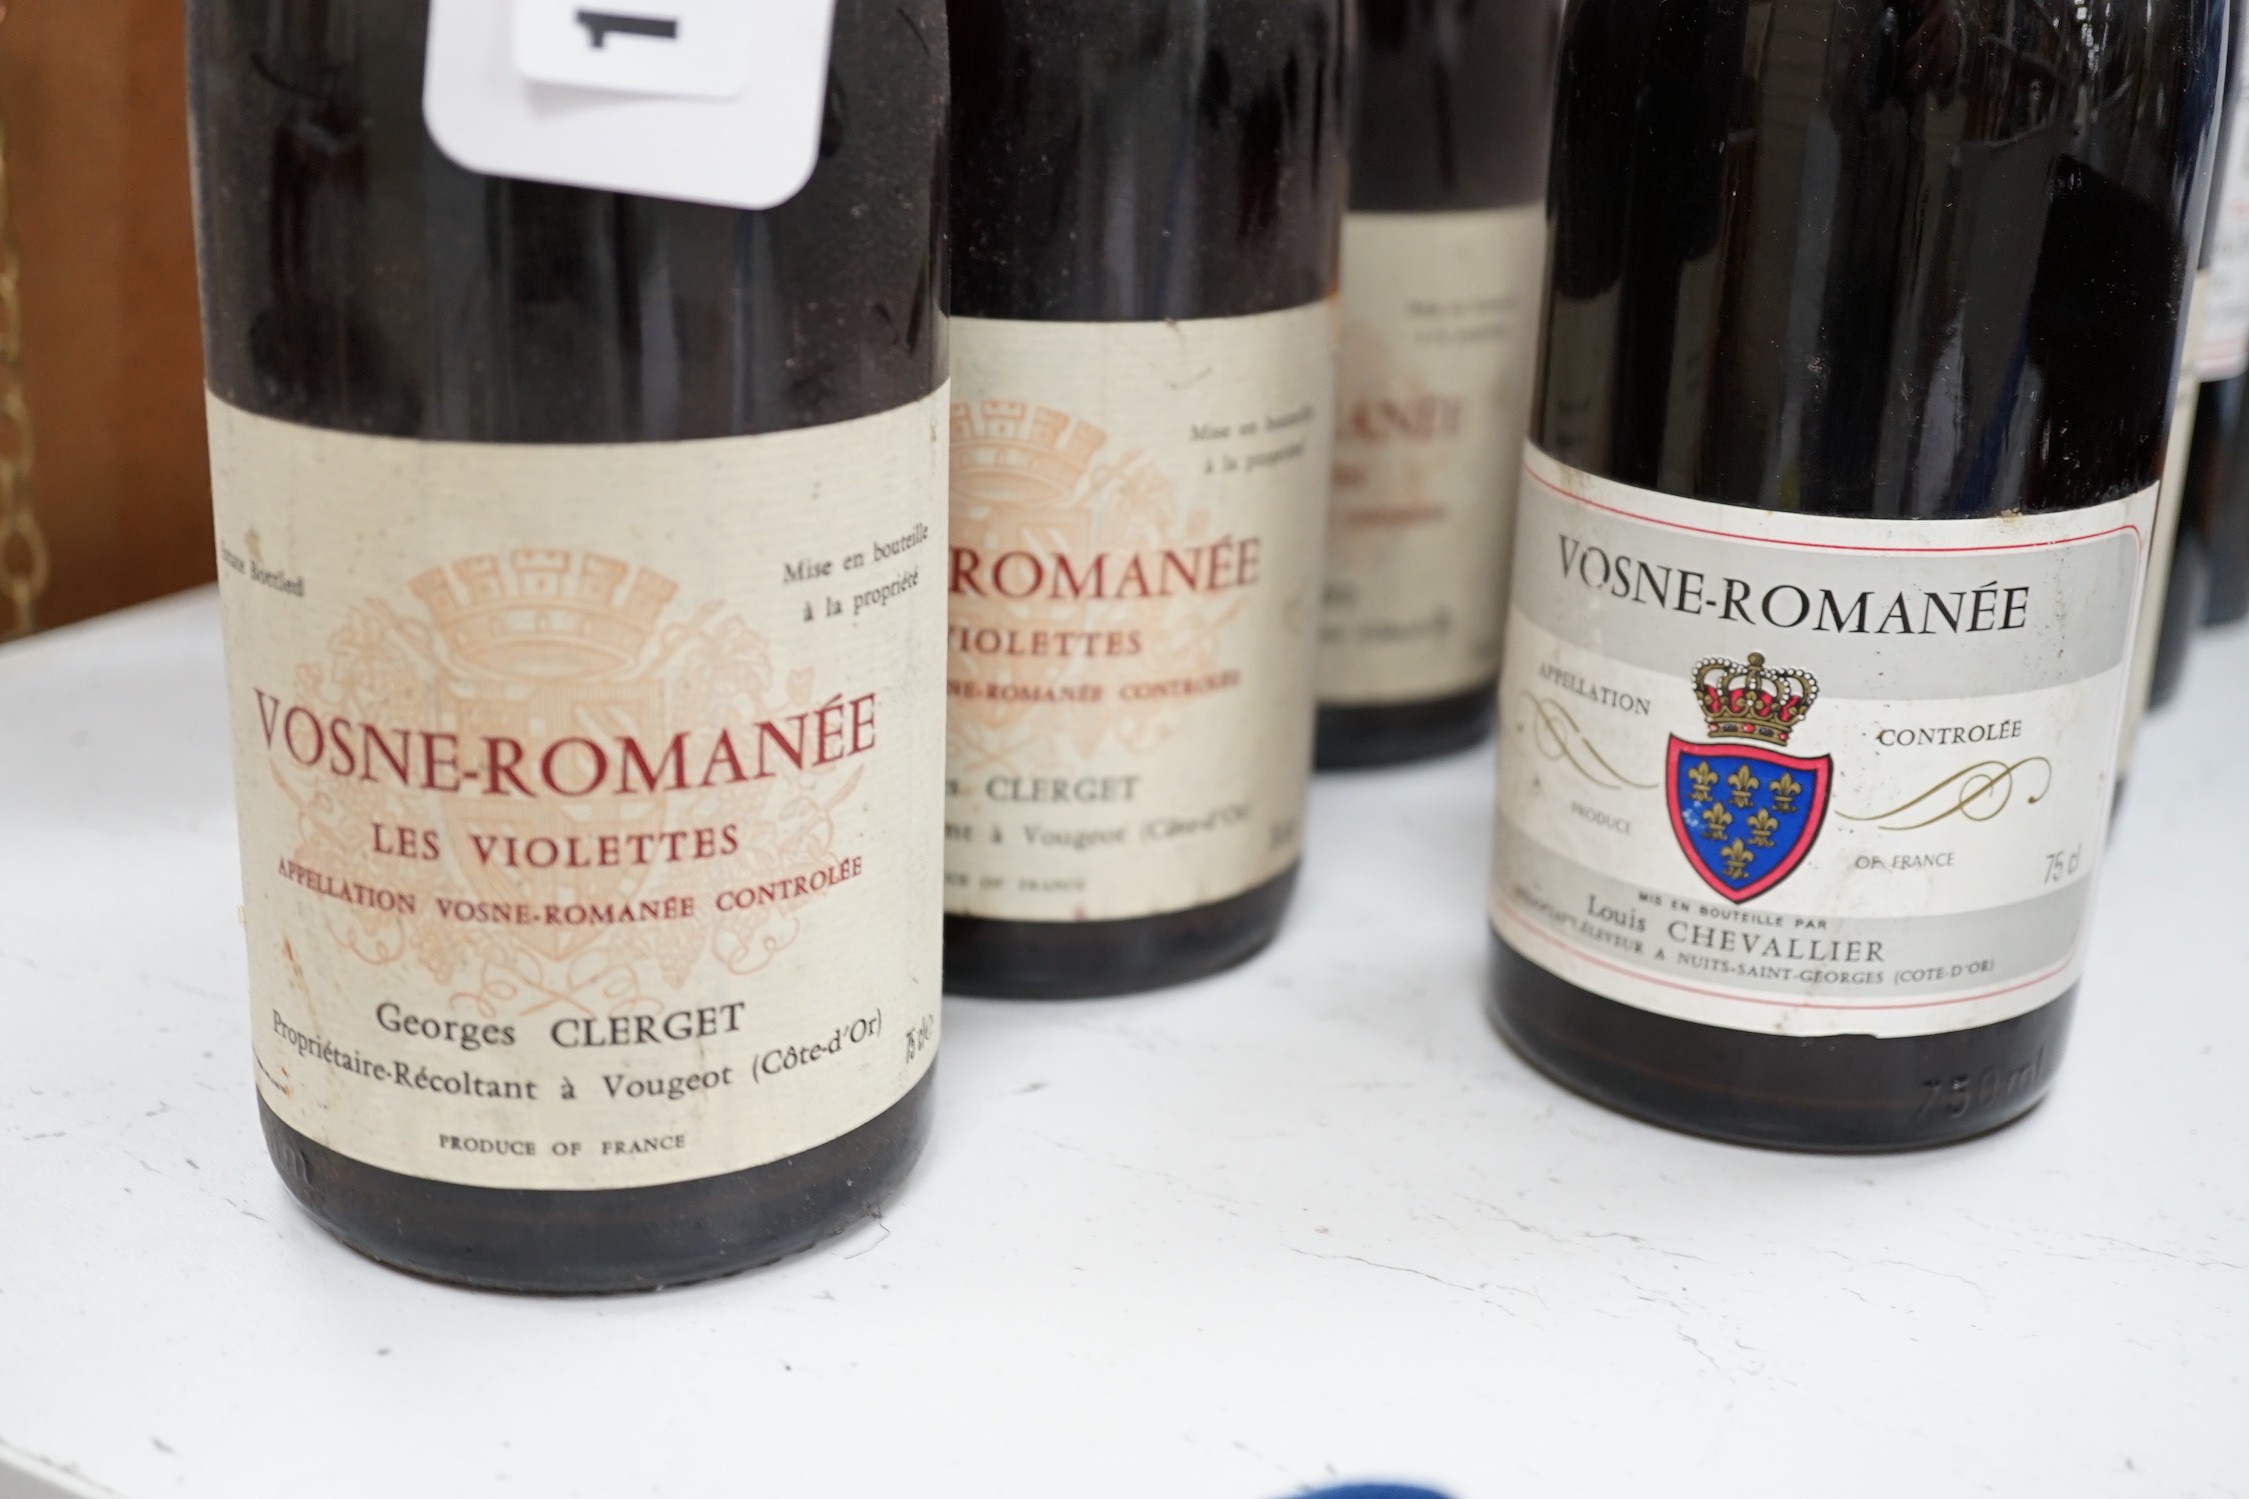 Seven bottles of 1982 Vosne-Romanee wine and six bottles of 1975 Chateau Lynch Bages Medoc, (13)